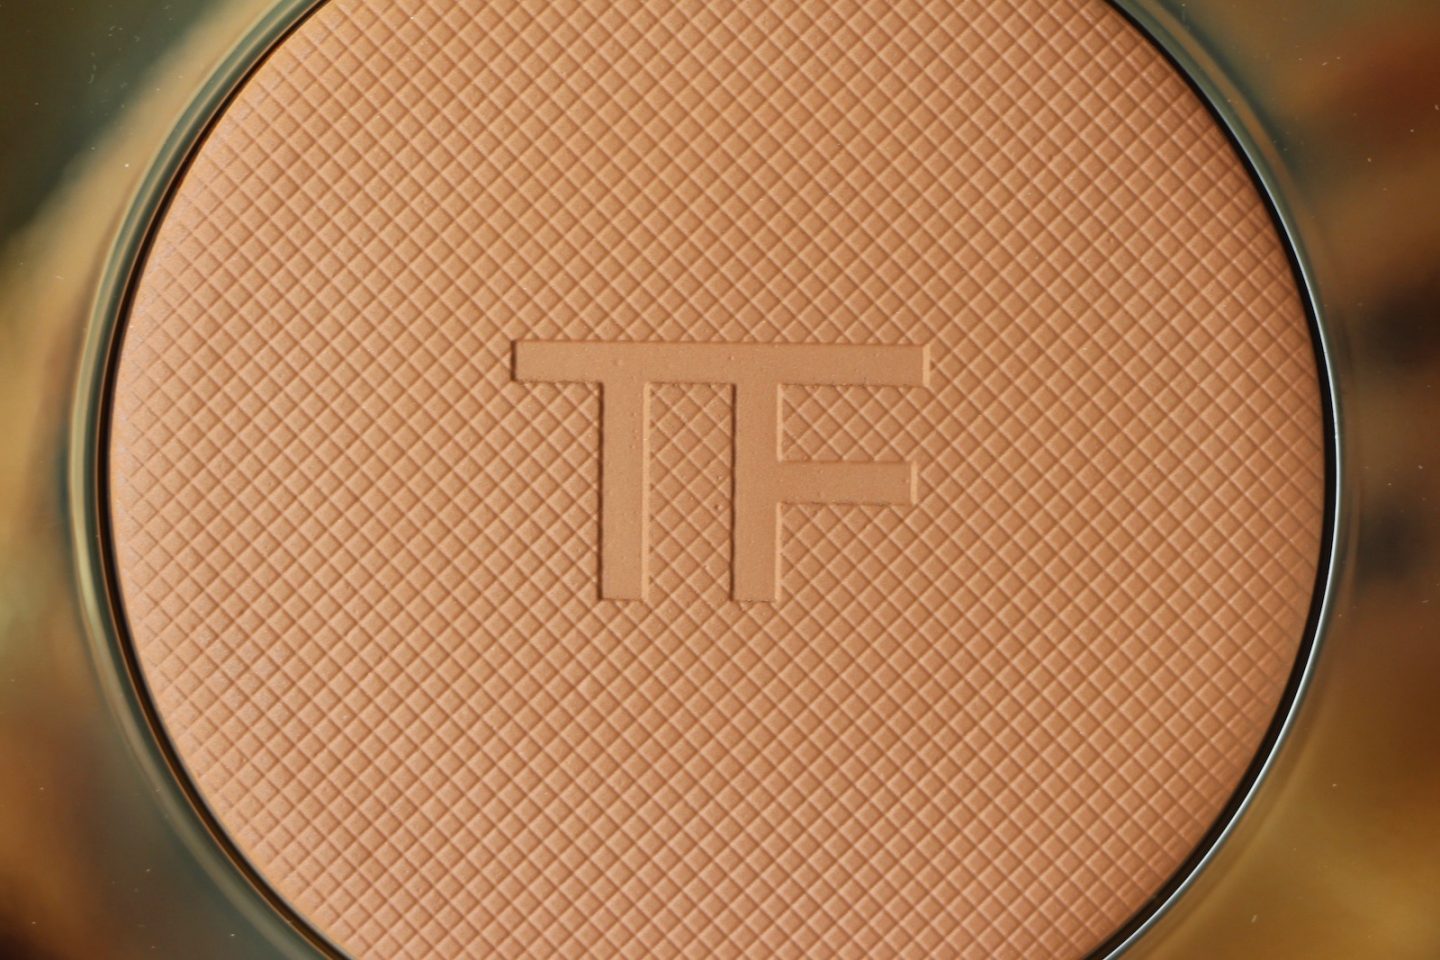 Tom Ford Soleil Summer Makeup Decadence A Model Recommends 😀 i am sharing another chubby brush from my collection. tom ford soleil summer makeup